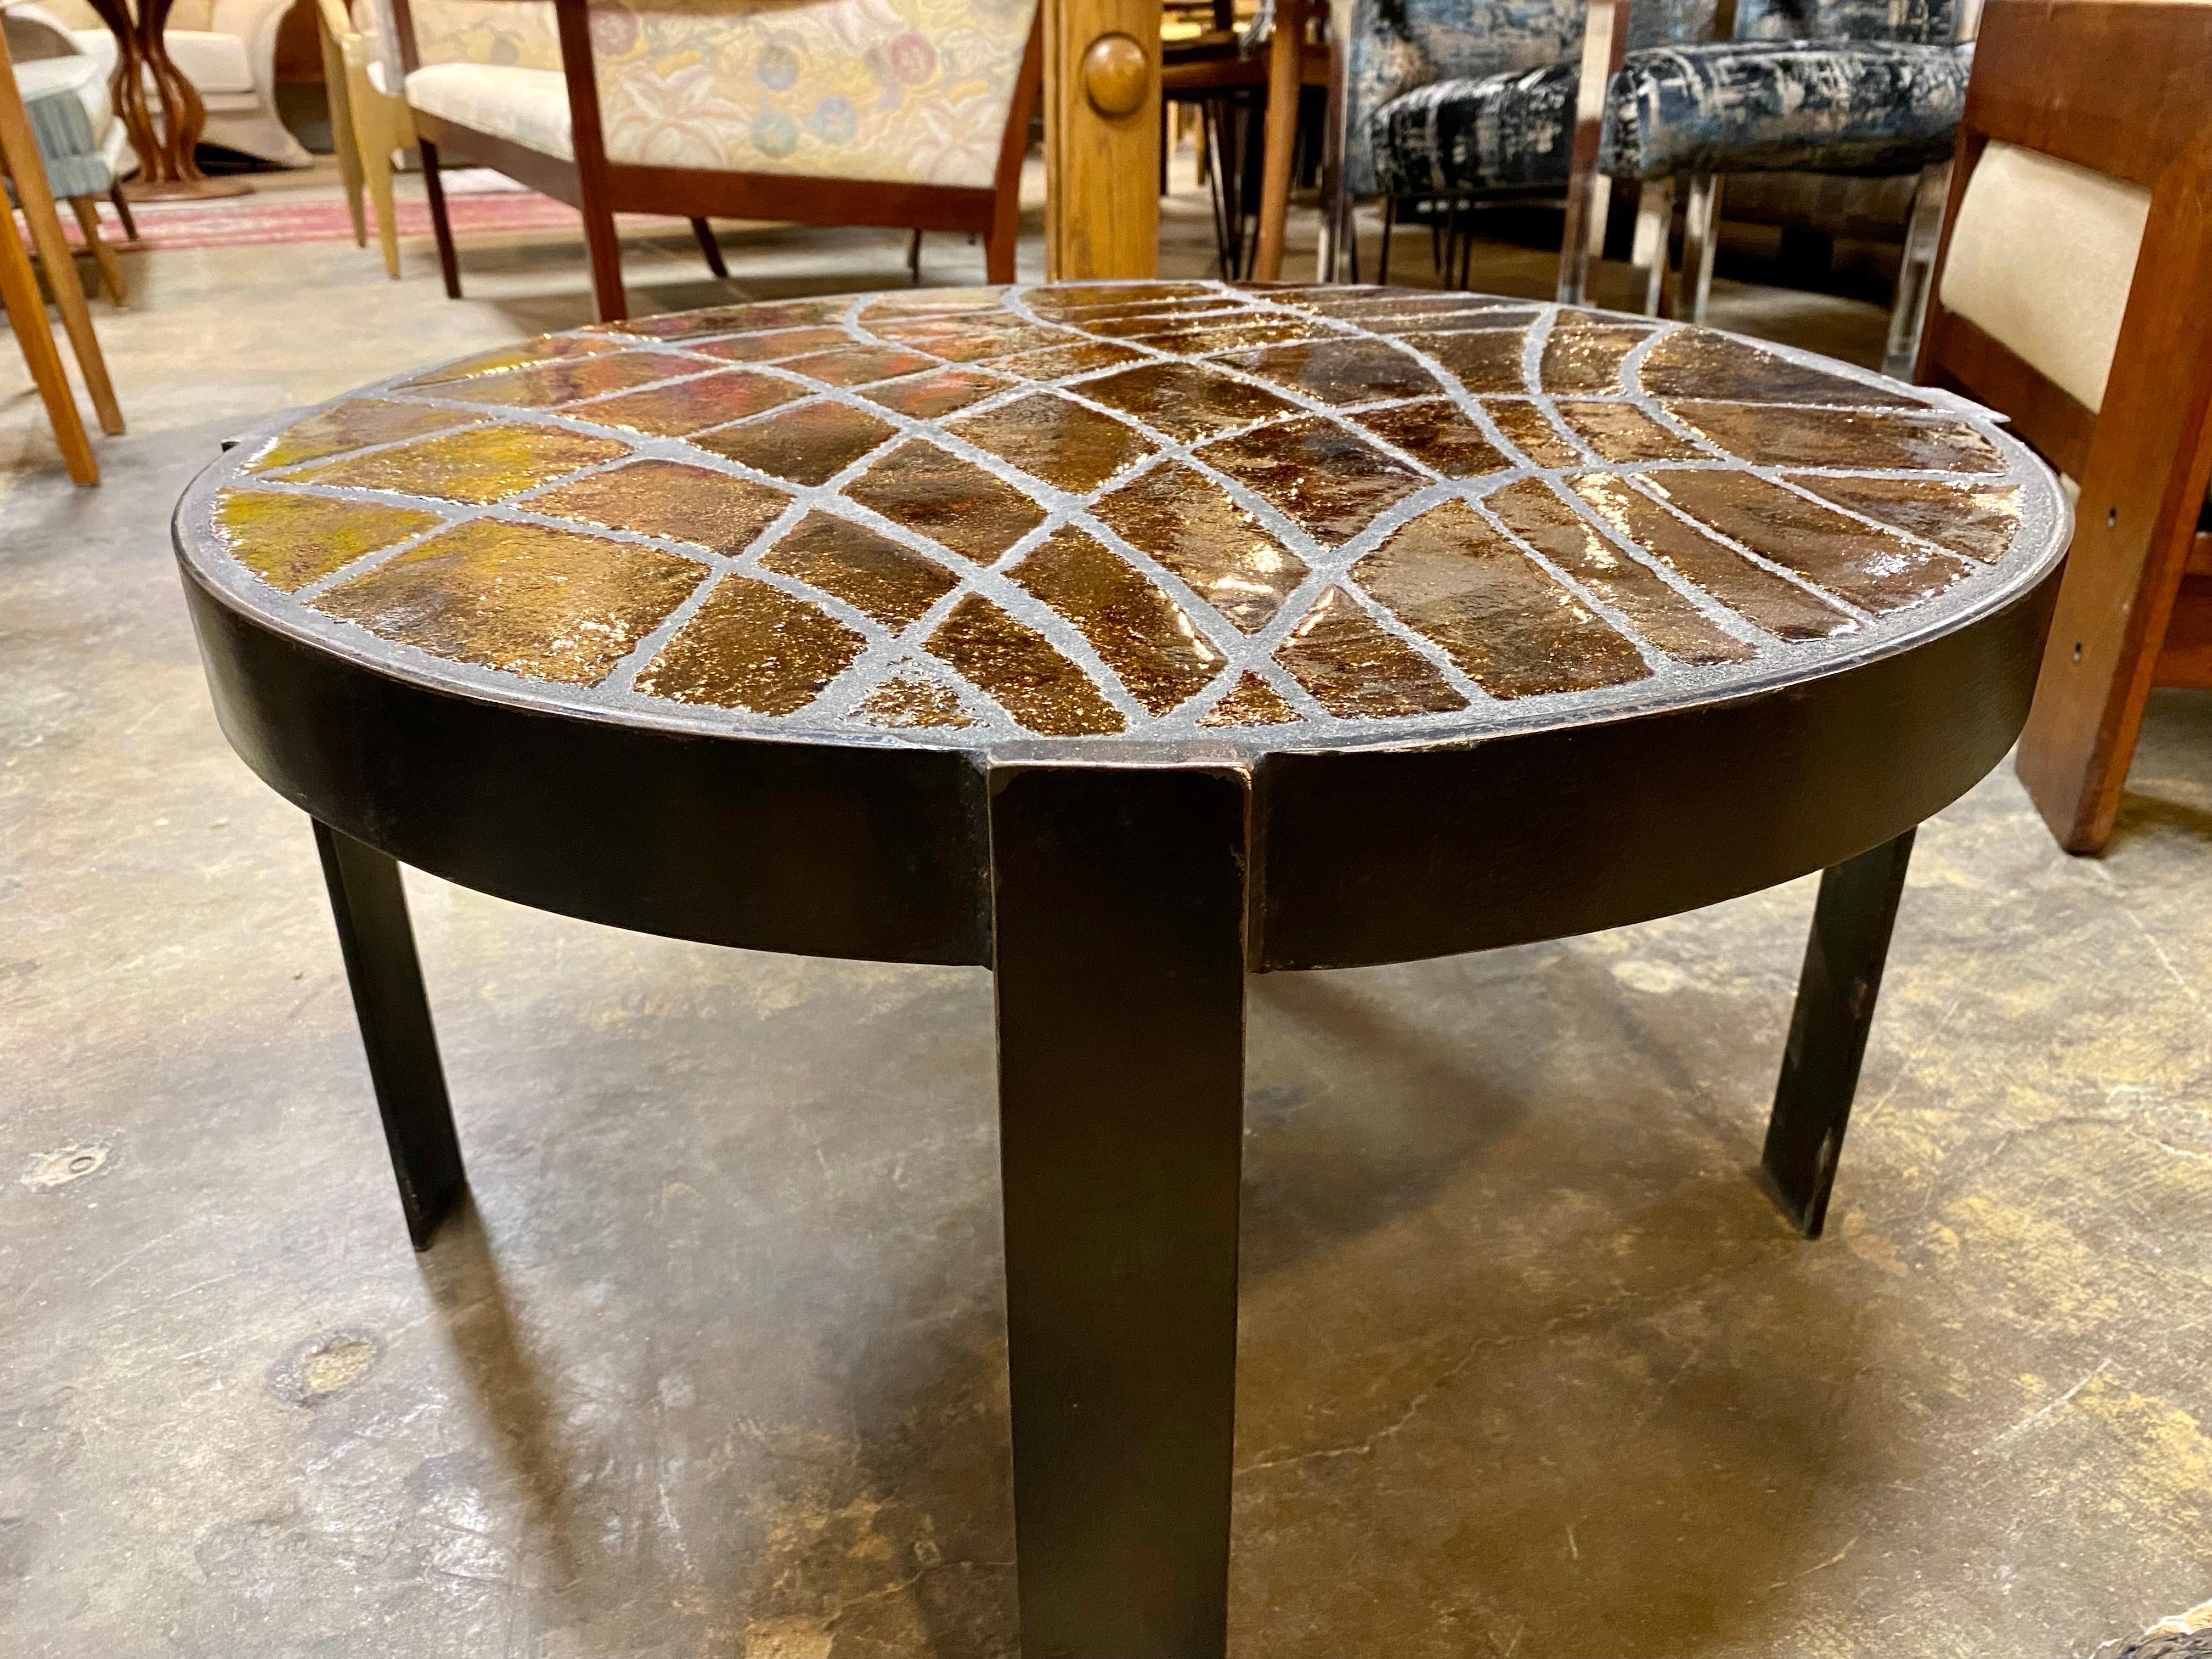 20th Century French Ceramic Tile Cocktail Table In The Manner of Roger Capron For Sale